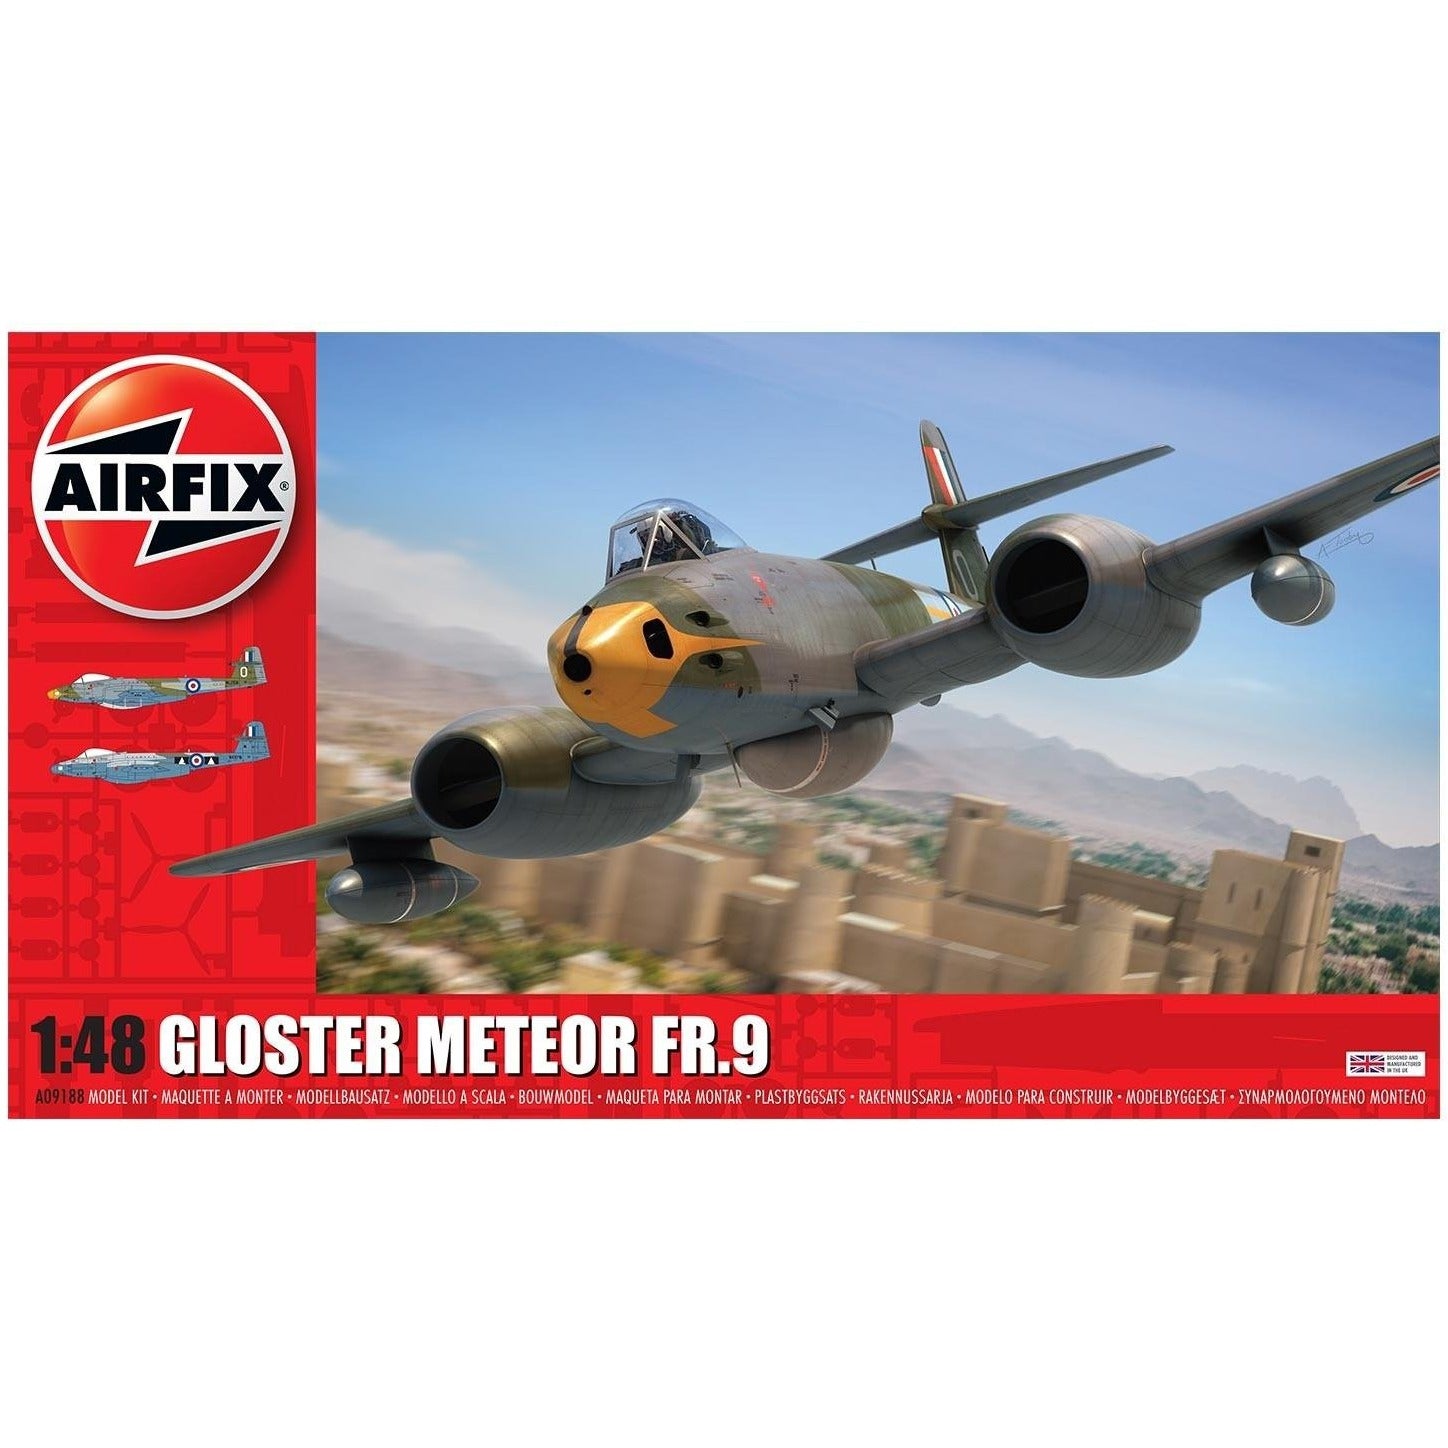 Gloster Meteor FR9 1/48 by Airfix